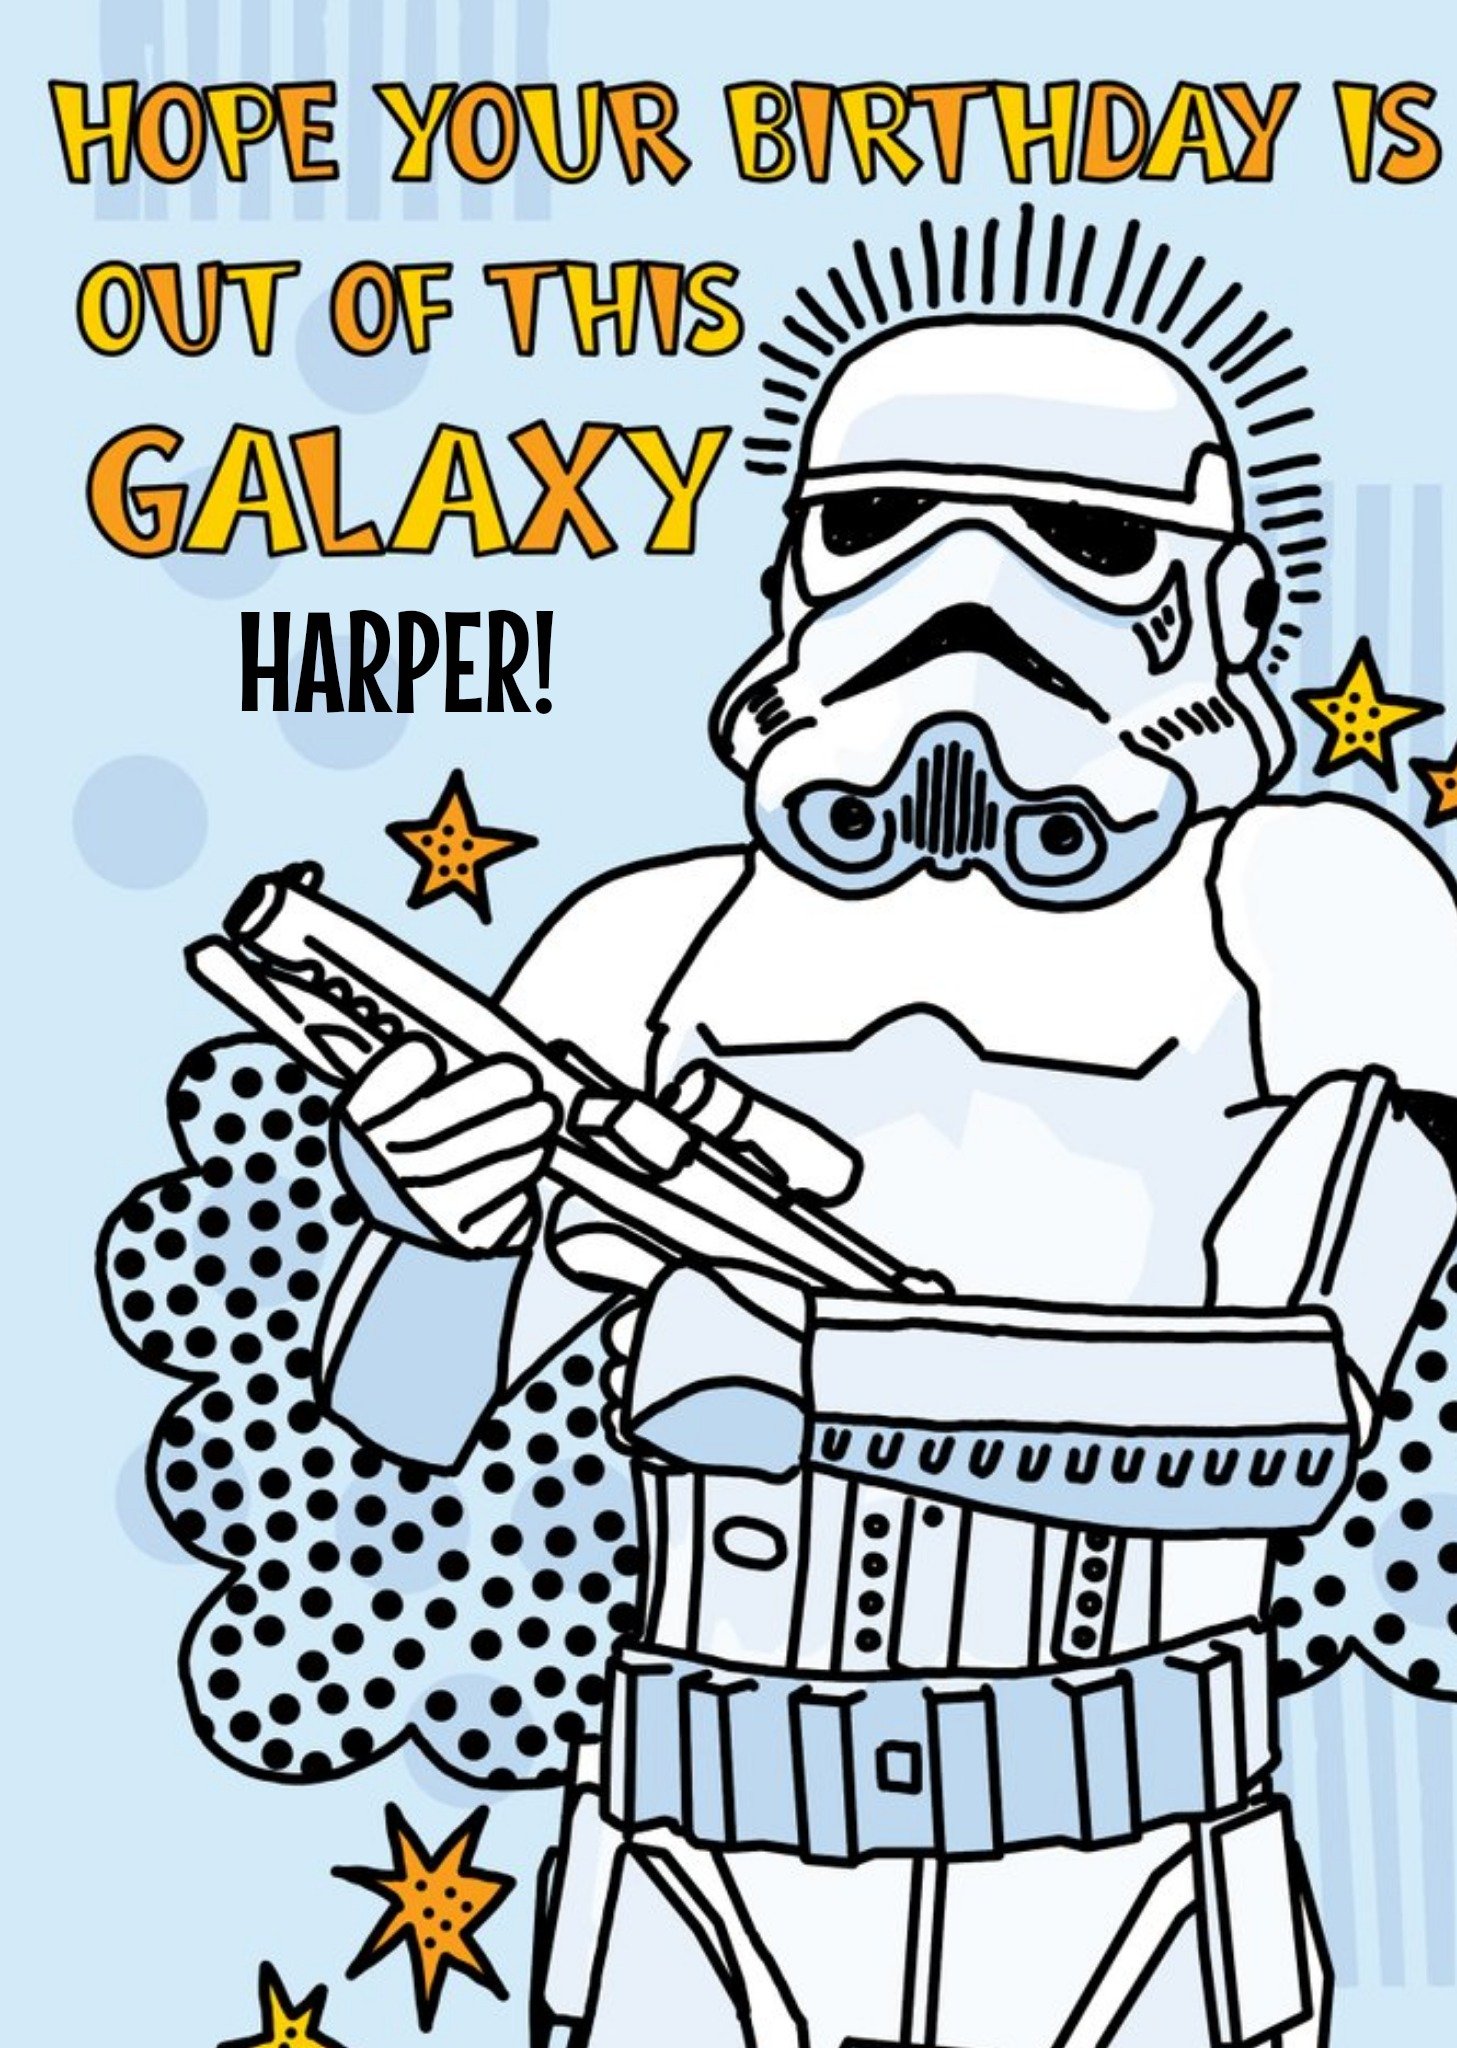 Disney Star Wars Stormtrooper Out Of This Galaxy Kids Birthday Card Ecard